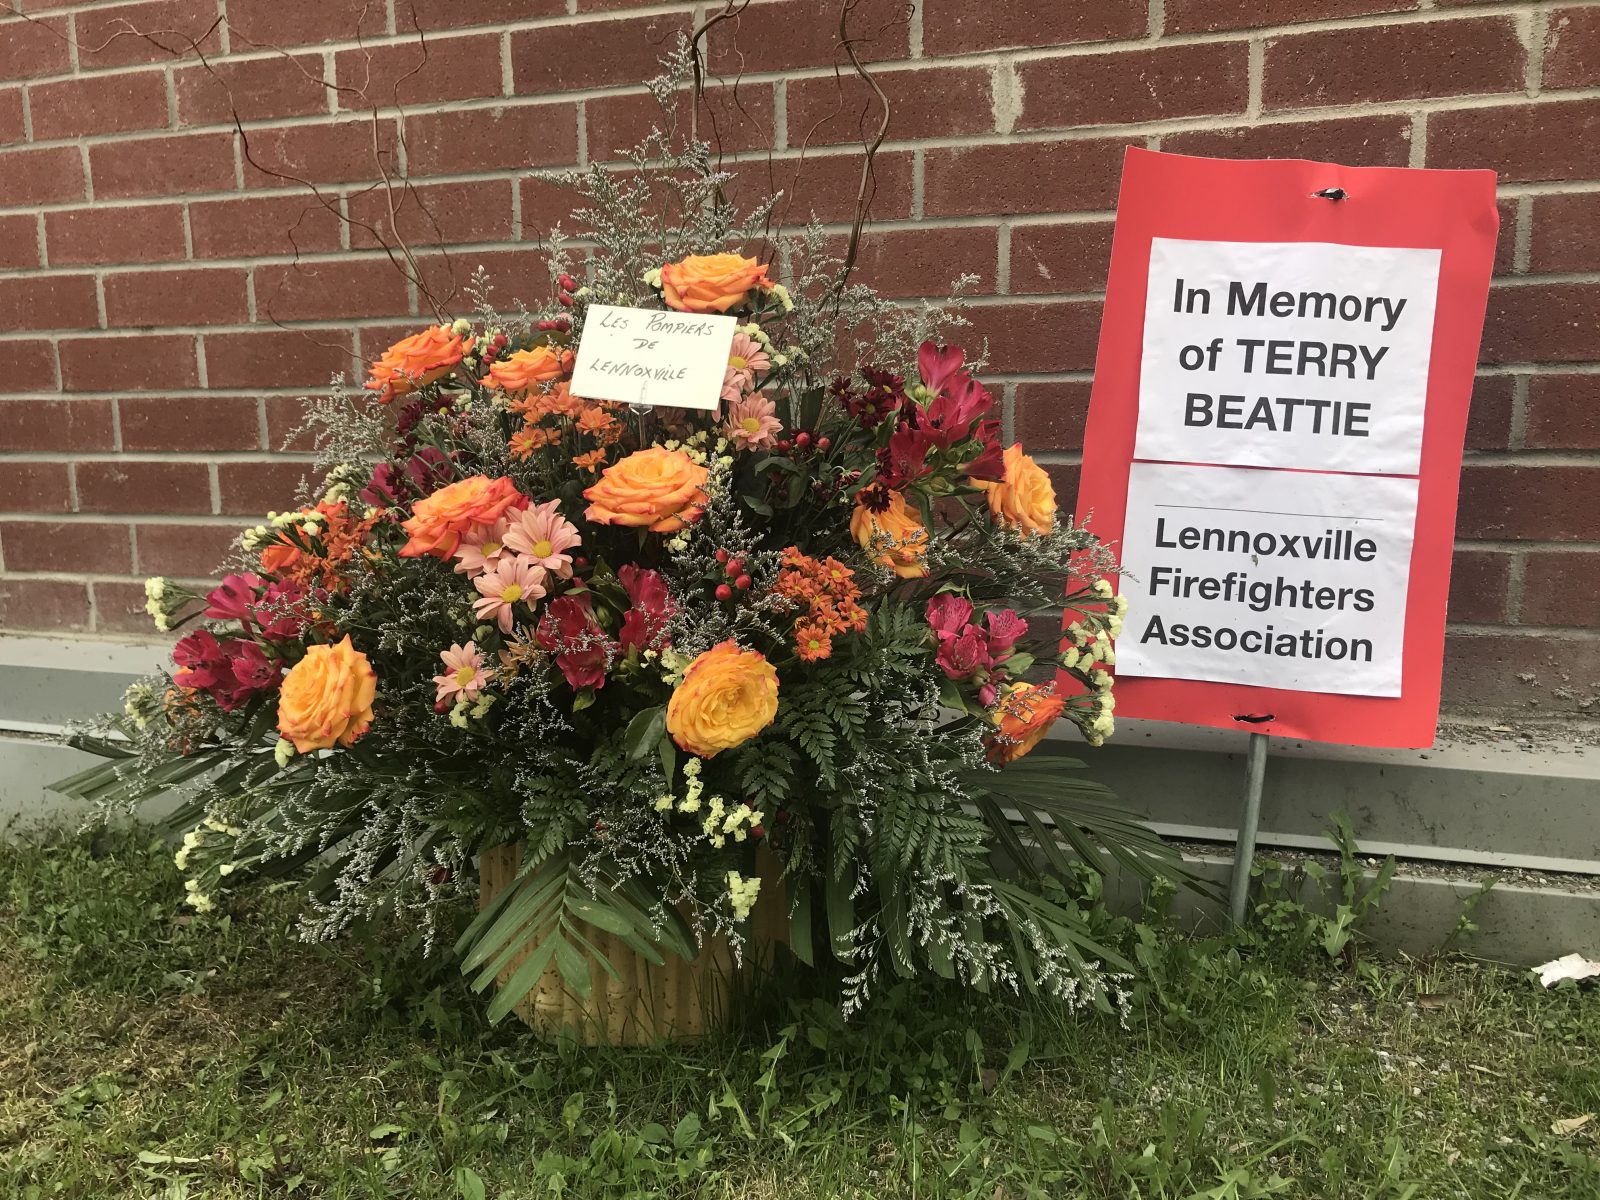 Lennoxville firefighters pay tribute to Terry Beattie